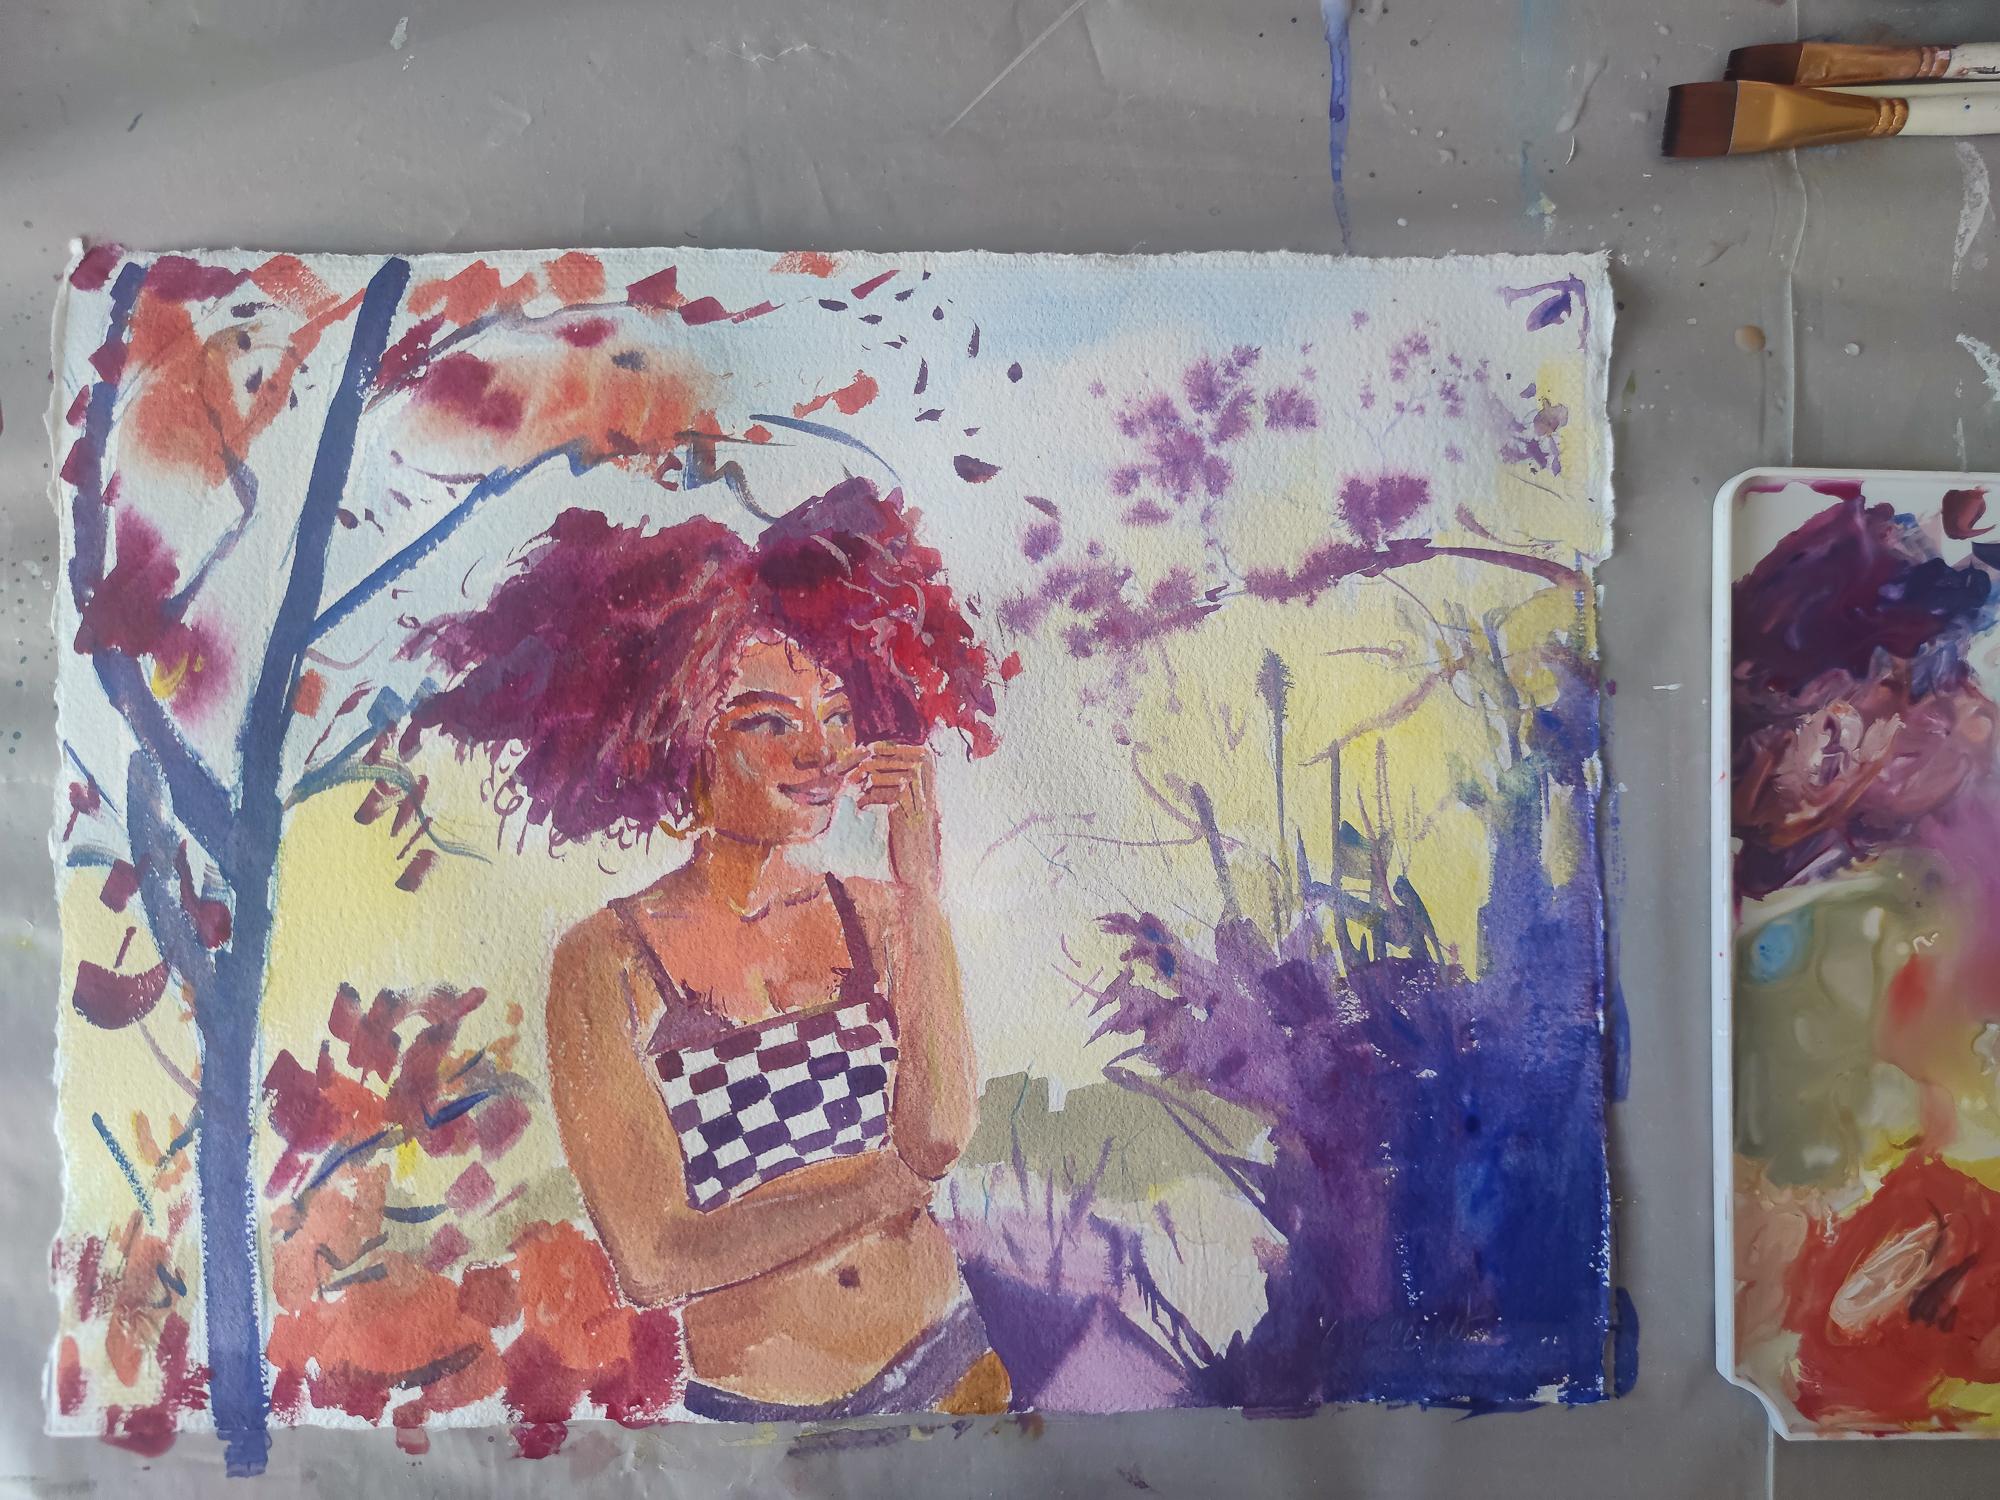 This gouache on paper takes up the themes dear to Linda CLerget: femininity, nature and joy. Here, the colors shift from orange to violet, and the young girl's hair blends with the orange hues of the sunset leaves. It's all about creating harmony